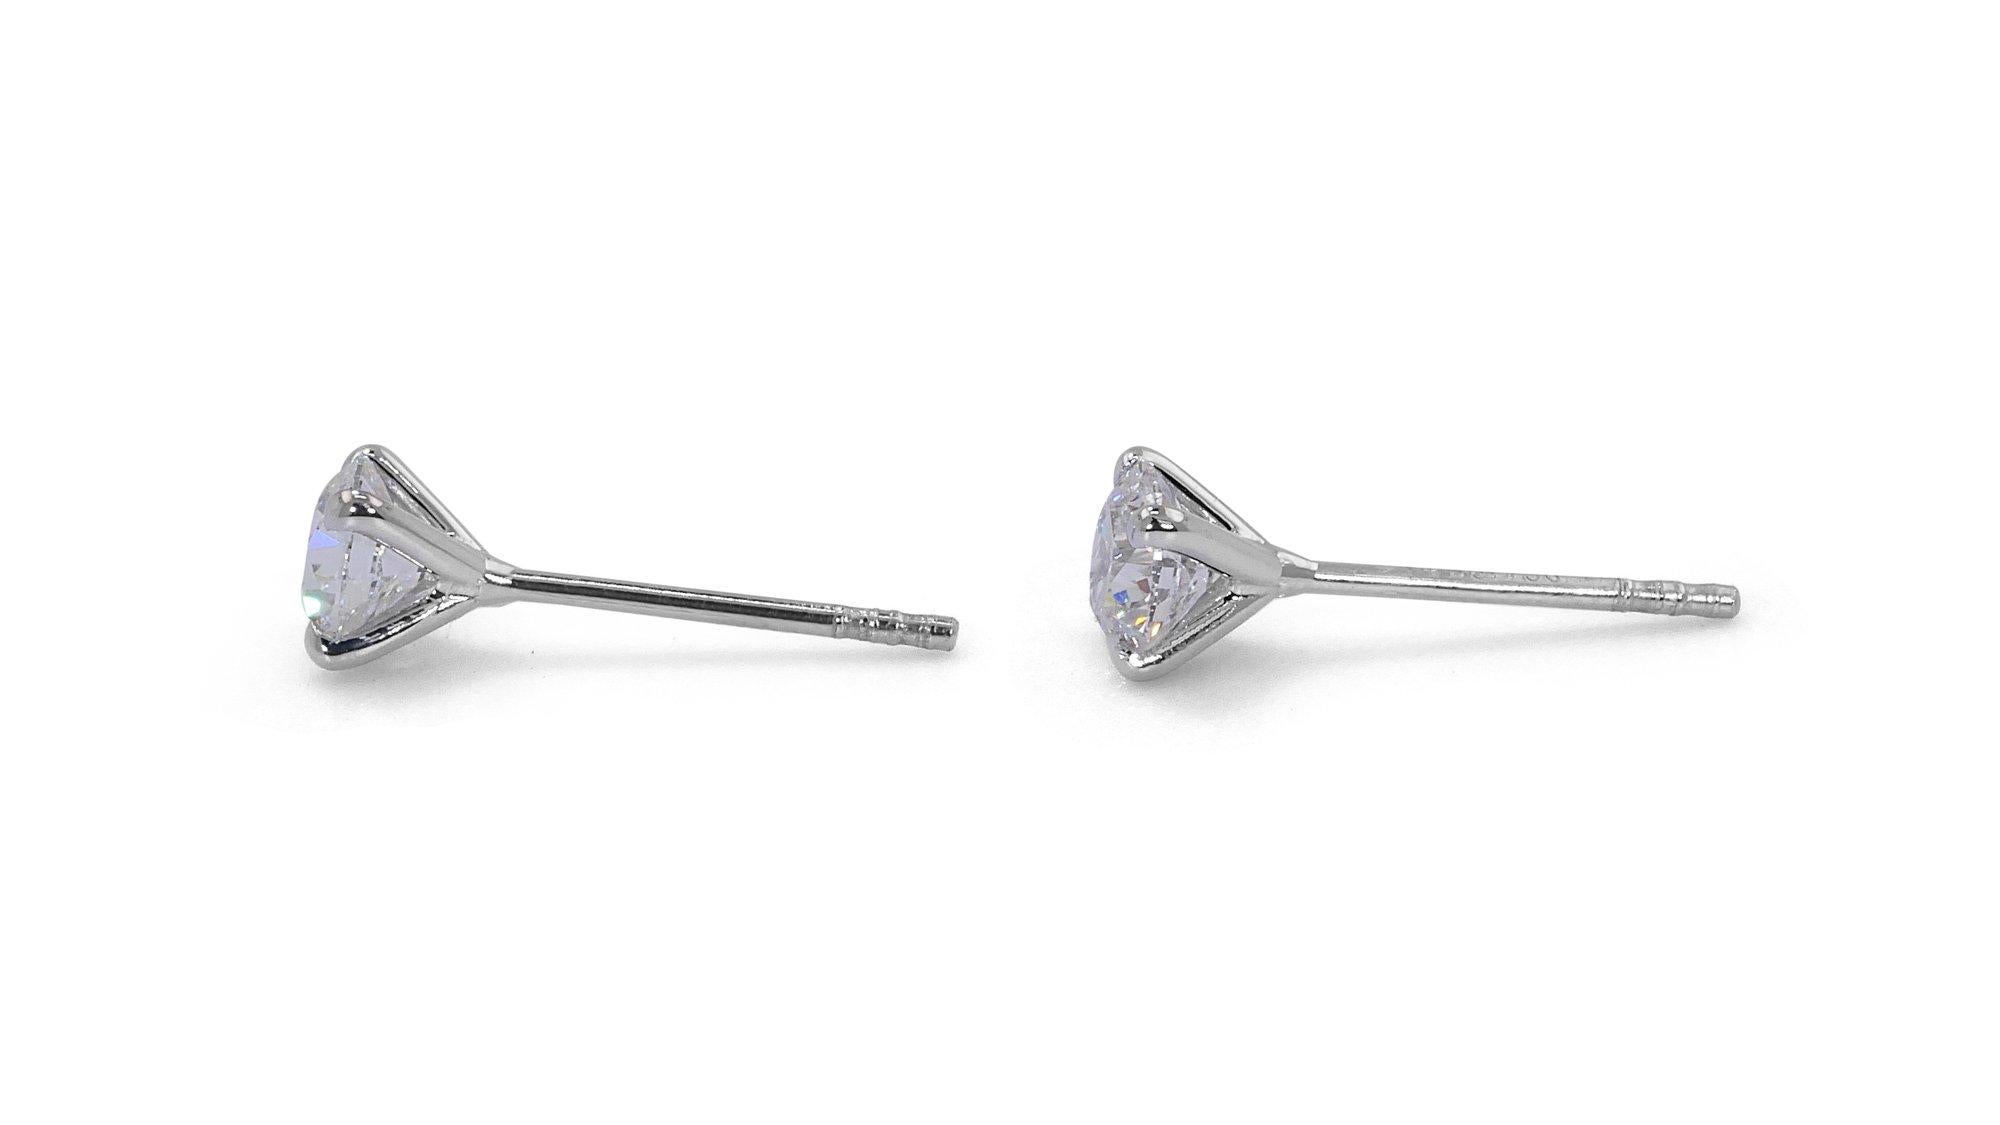 Stunning 18k White Gold Stud Earrings with 0.80 Ct Natural Diamonds GIA Cert For Sale 3